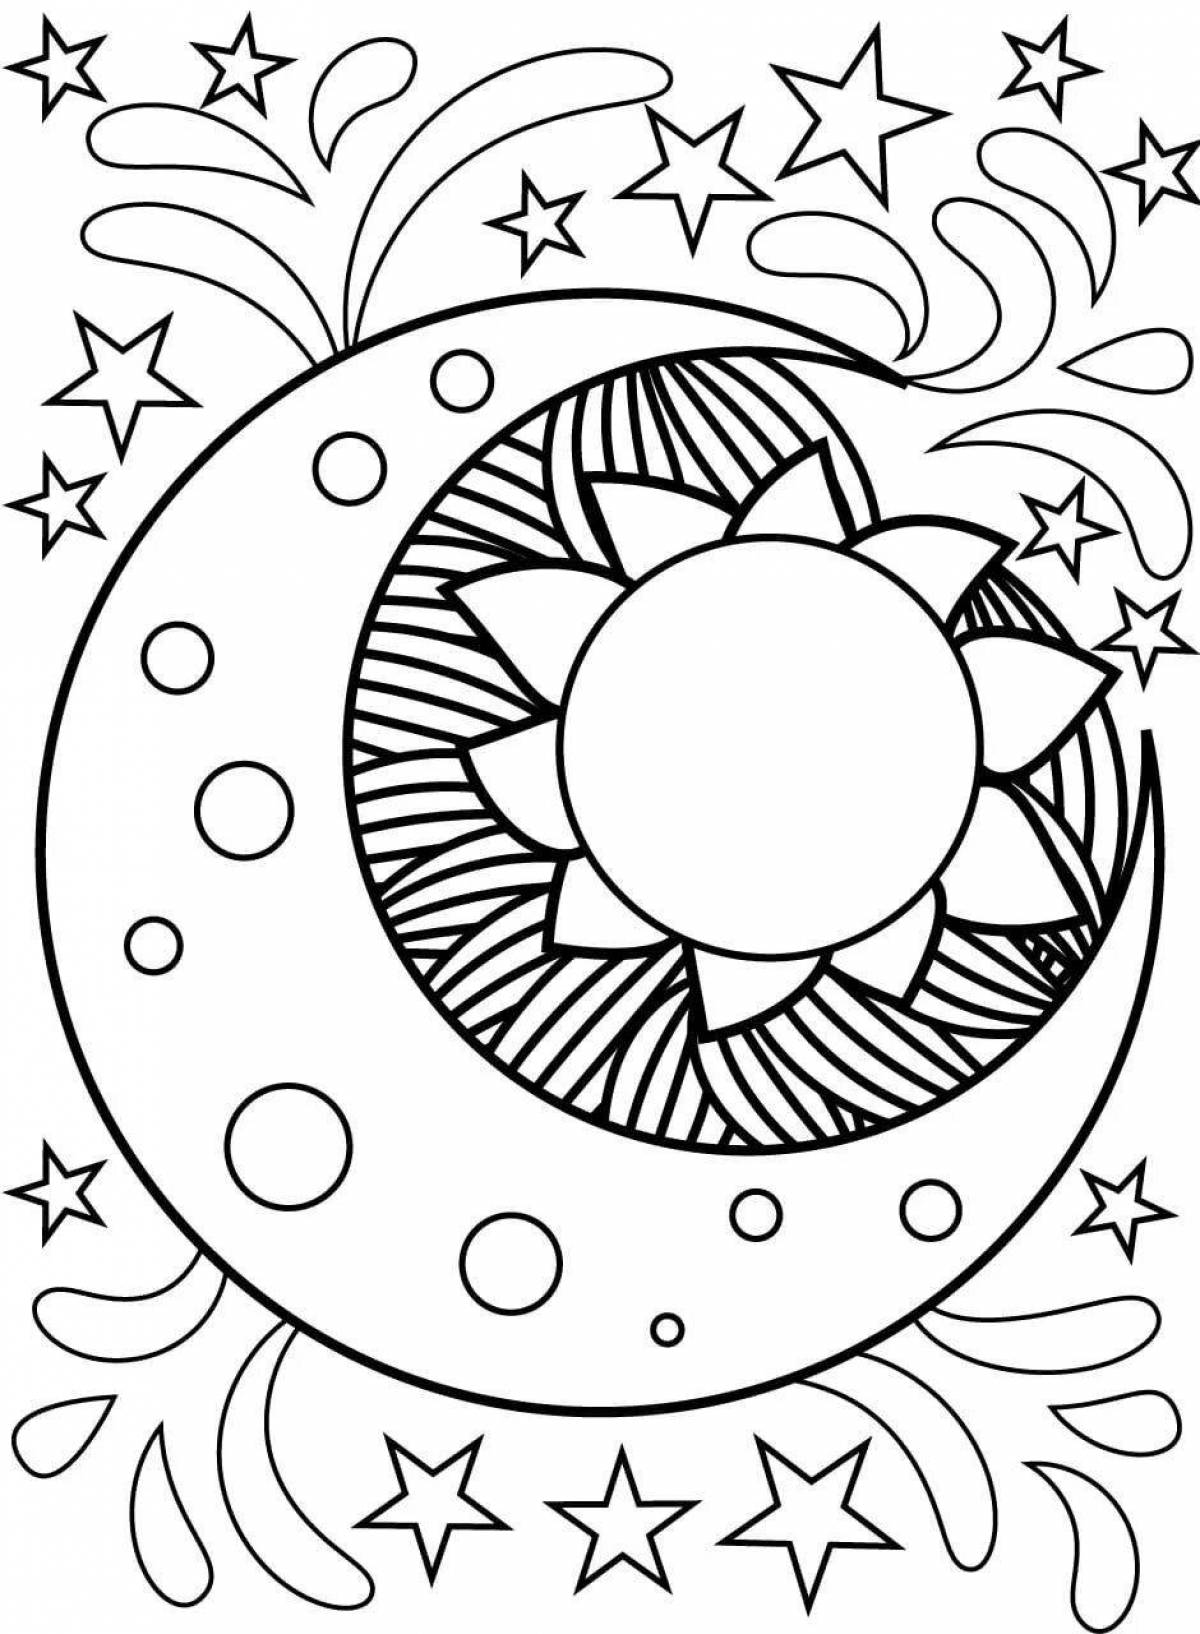 Exquisite moon and sun coloring book for kids